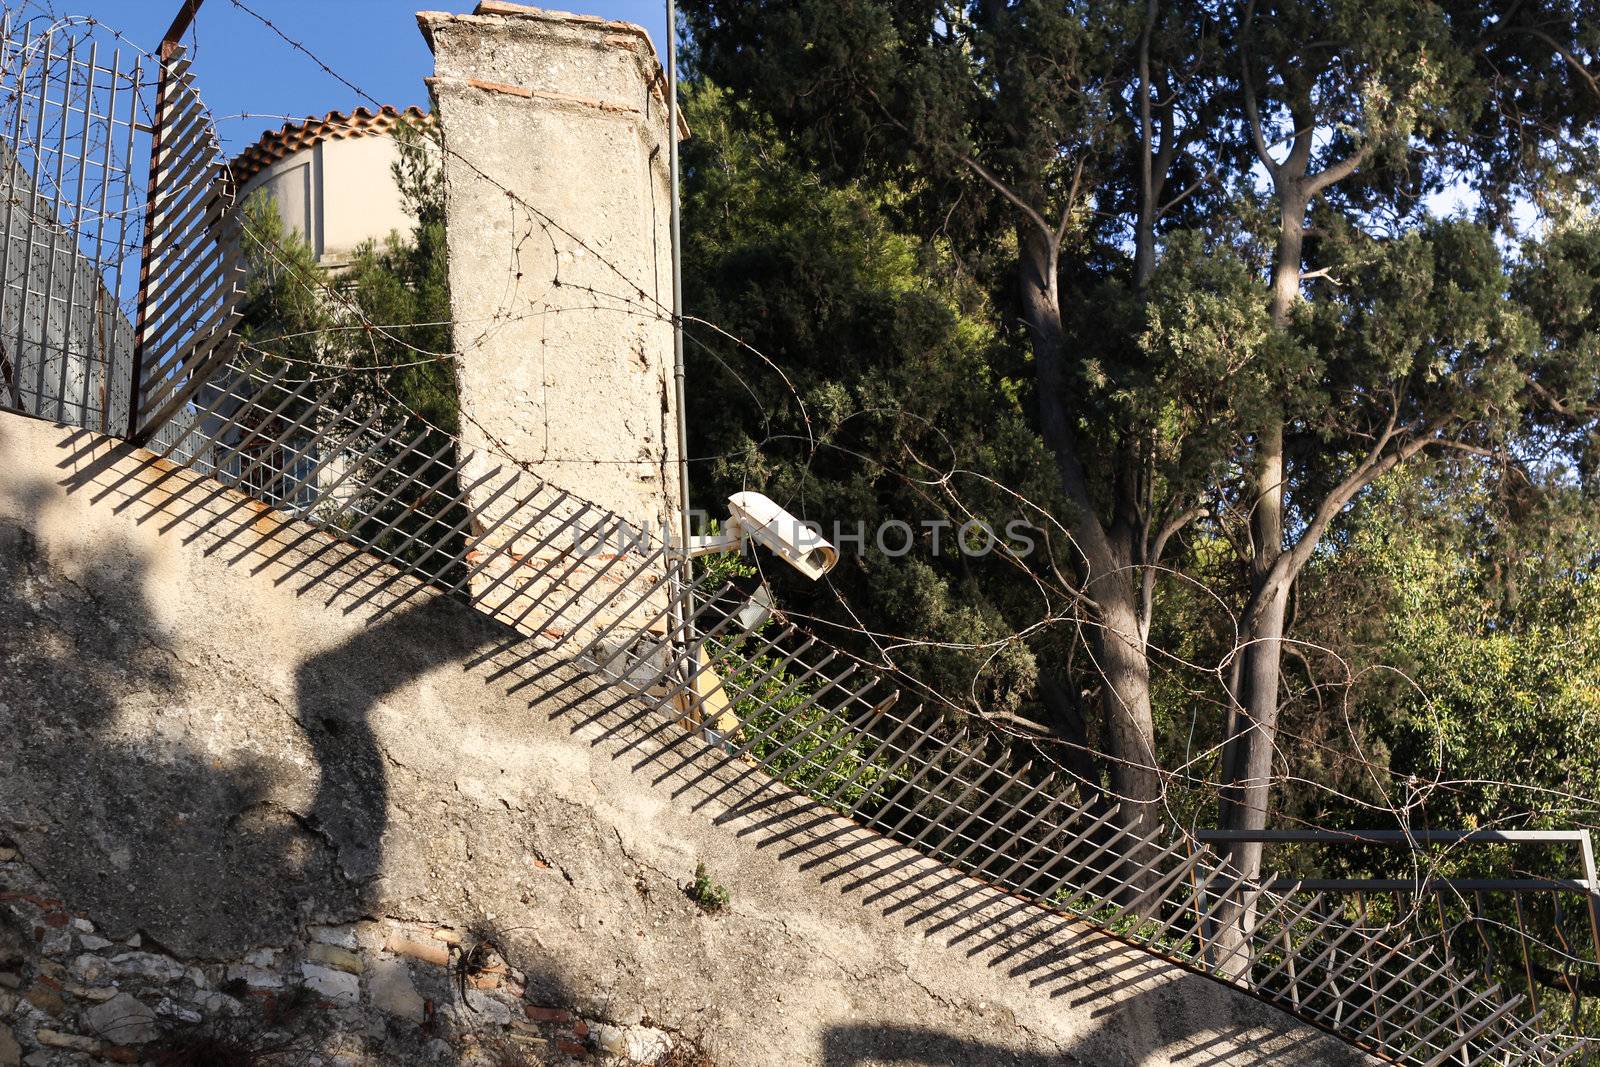 Surveillance Camera on a stone wall with barbed fence